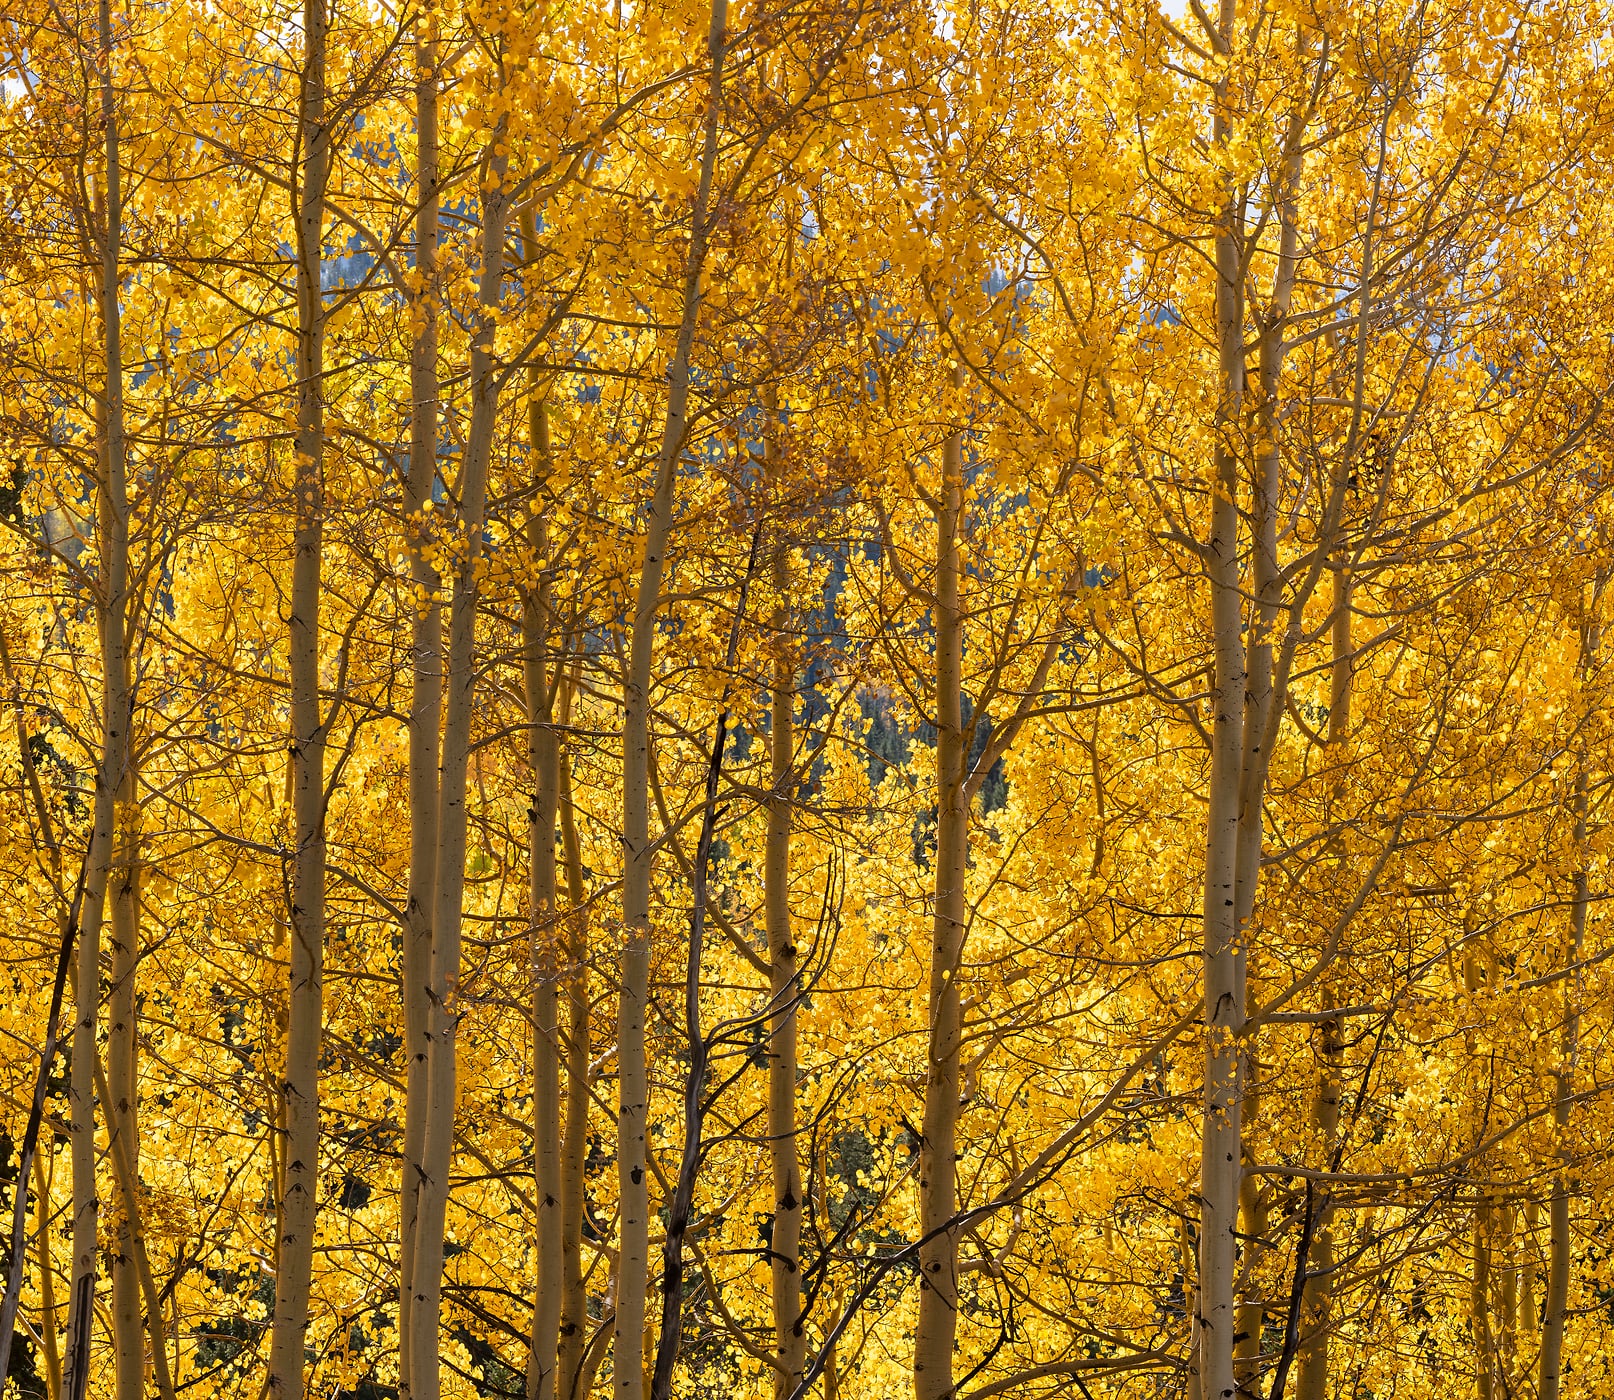 154 megapixels! A very high resolution, large-format VAST photo print of golden yellow aspen trees in sunlight; nature forest photograph created by Greg Probst in San Juan National Forest, Colorado.